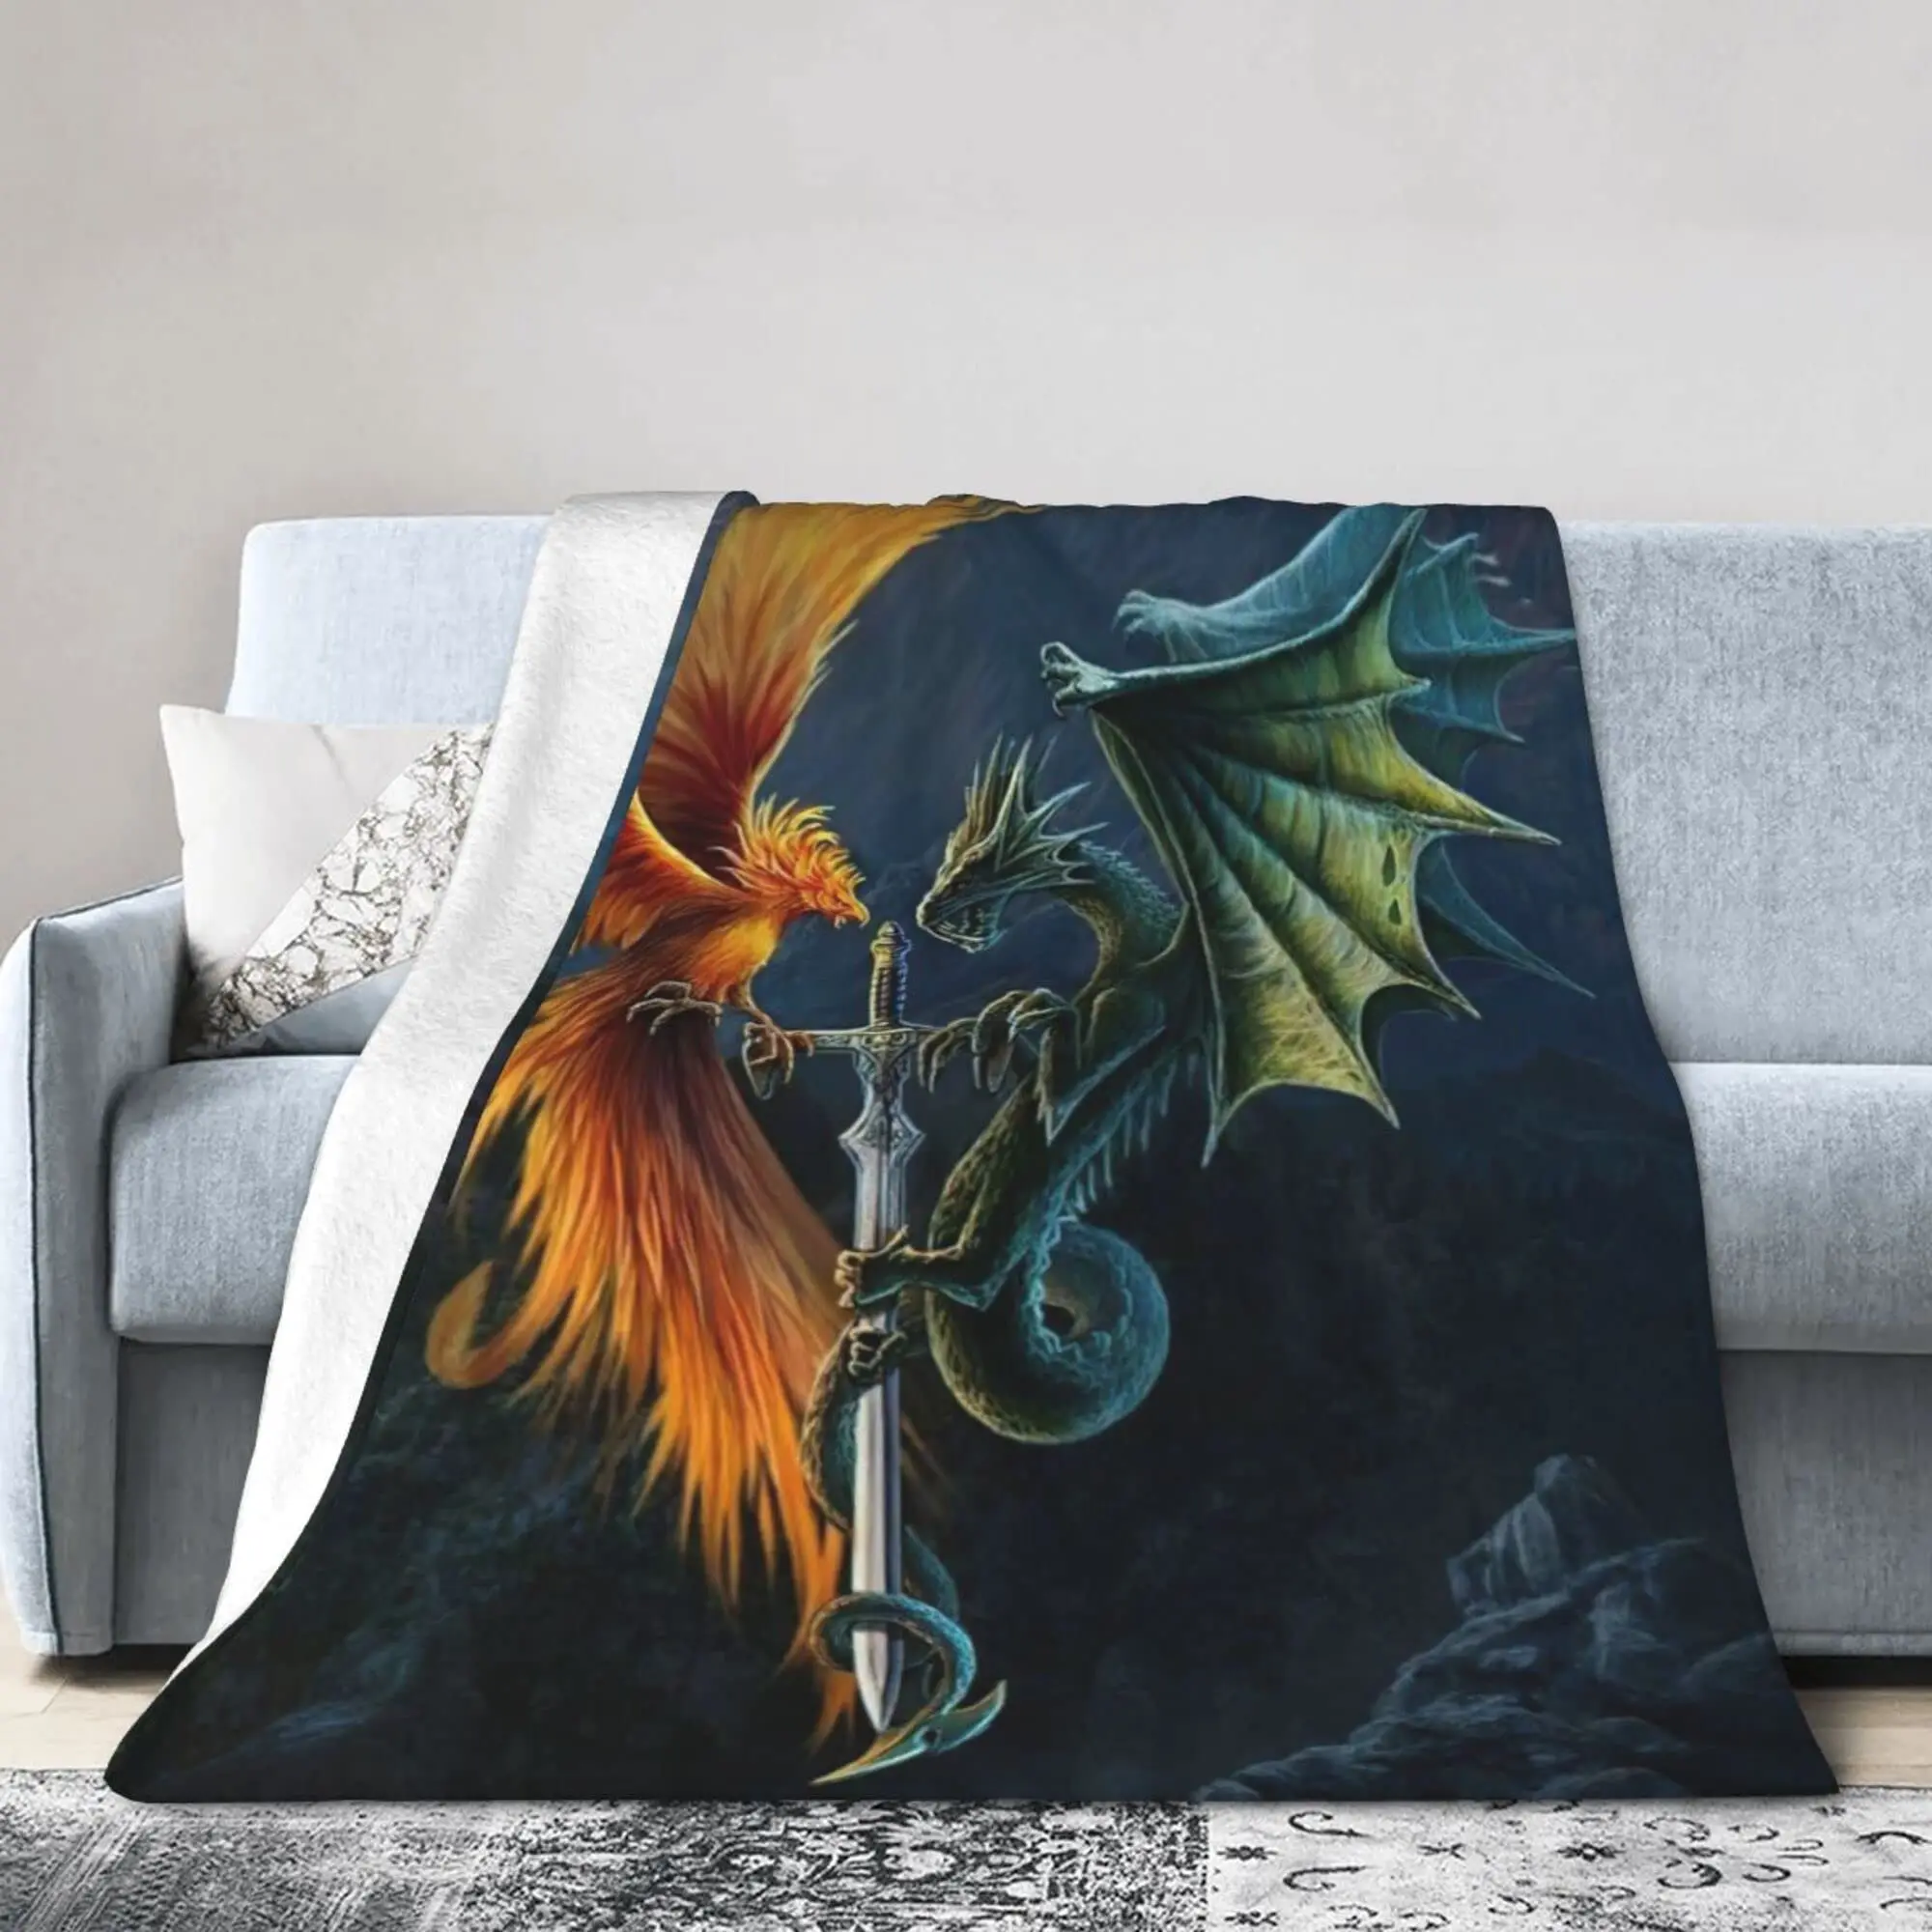 

Flame Dragon Phoenix Western Myth Blanket Throw Blanket Flannel Blankets All Season Lightweight for Couch Bed Sofa Office Gifts